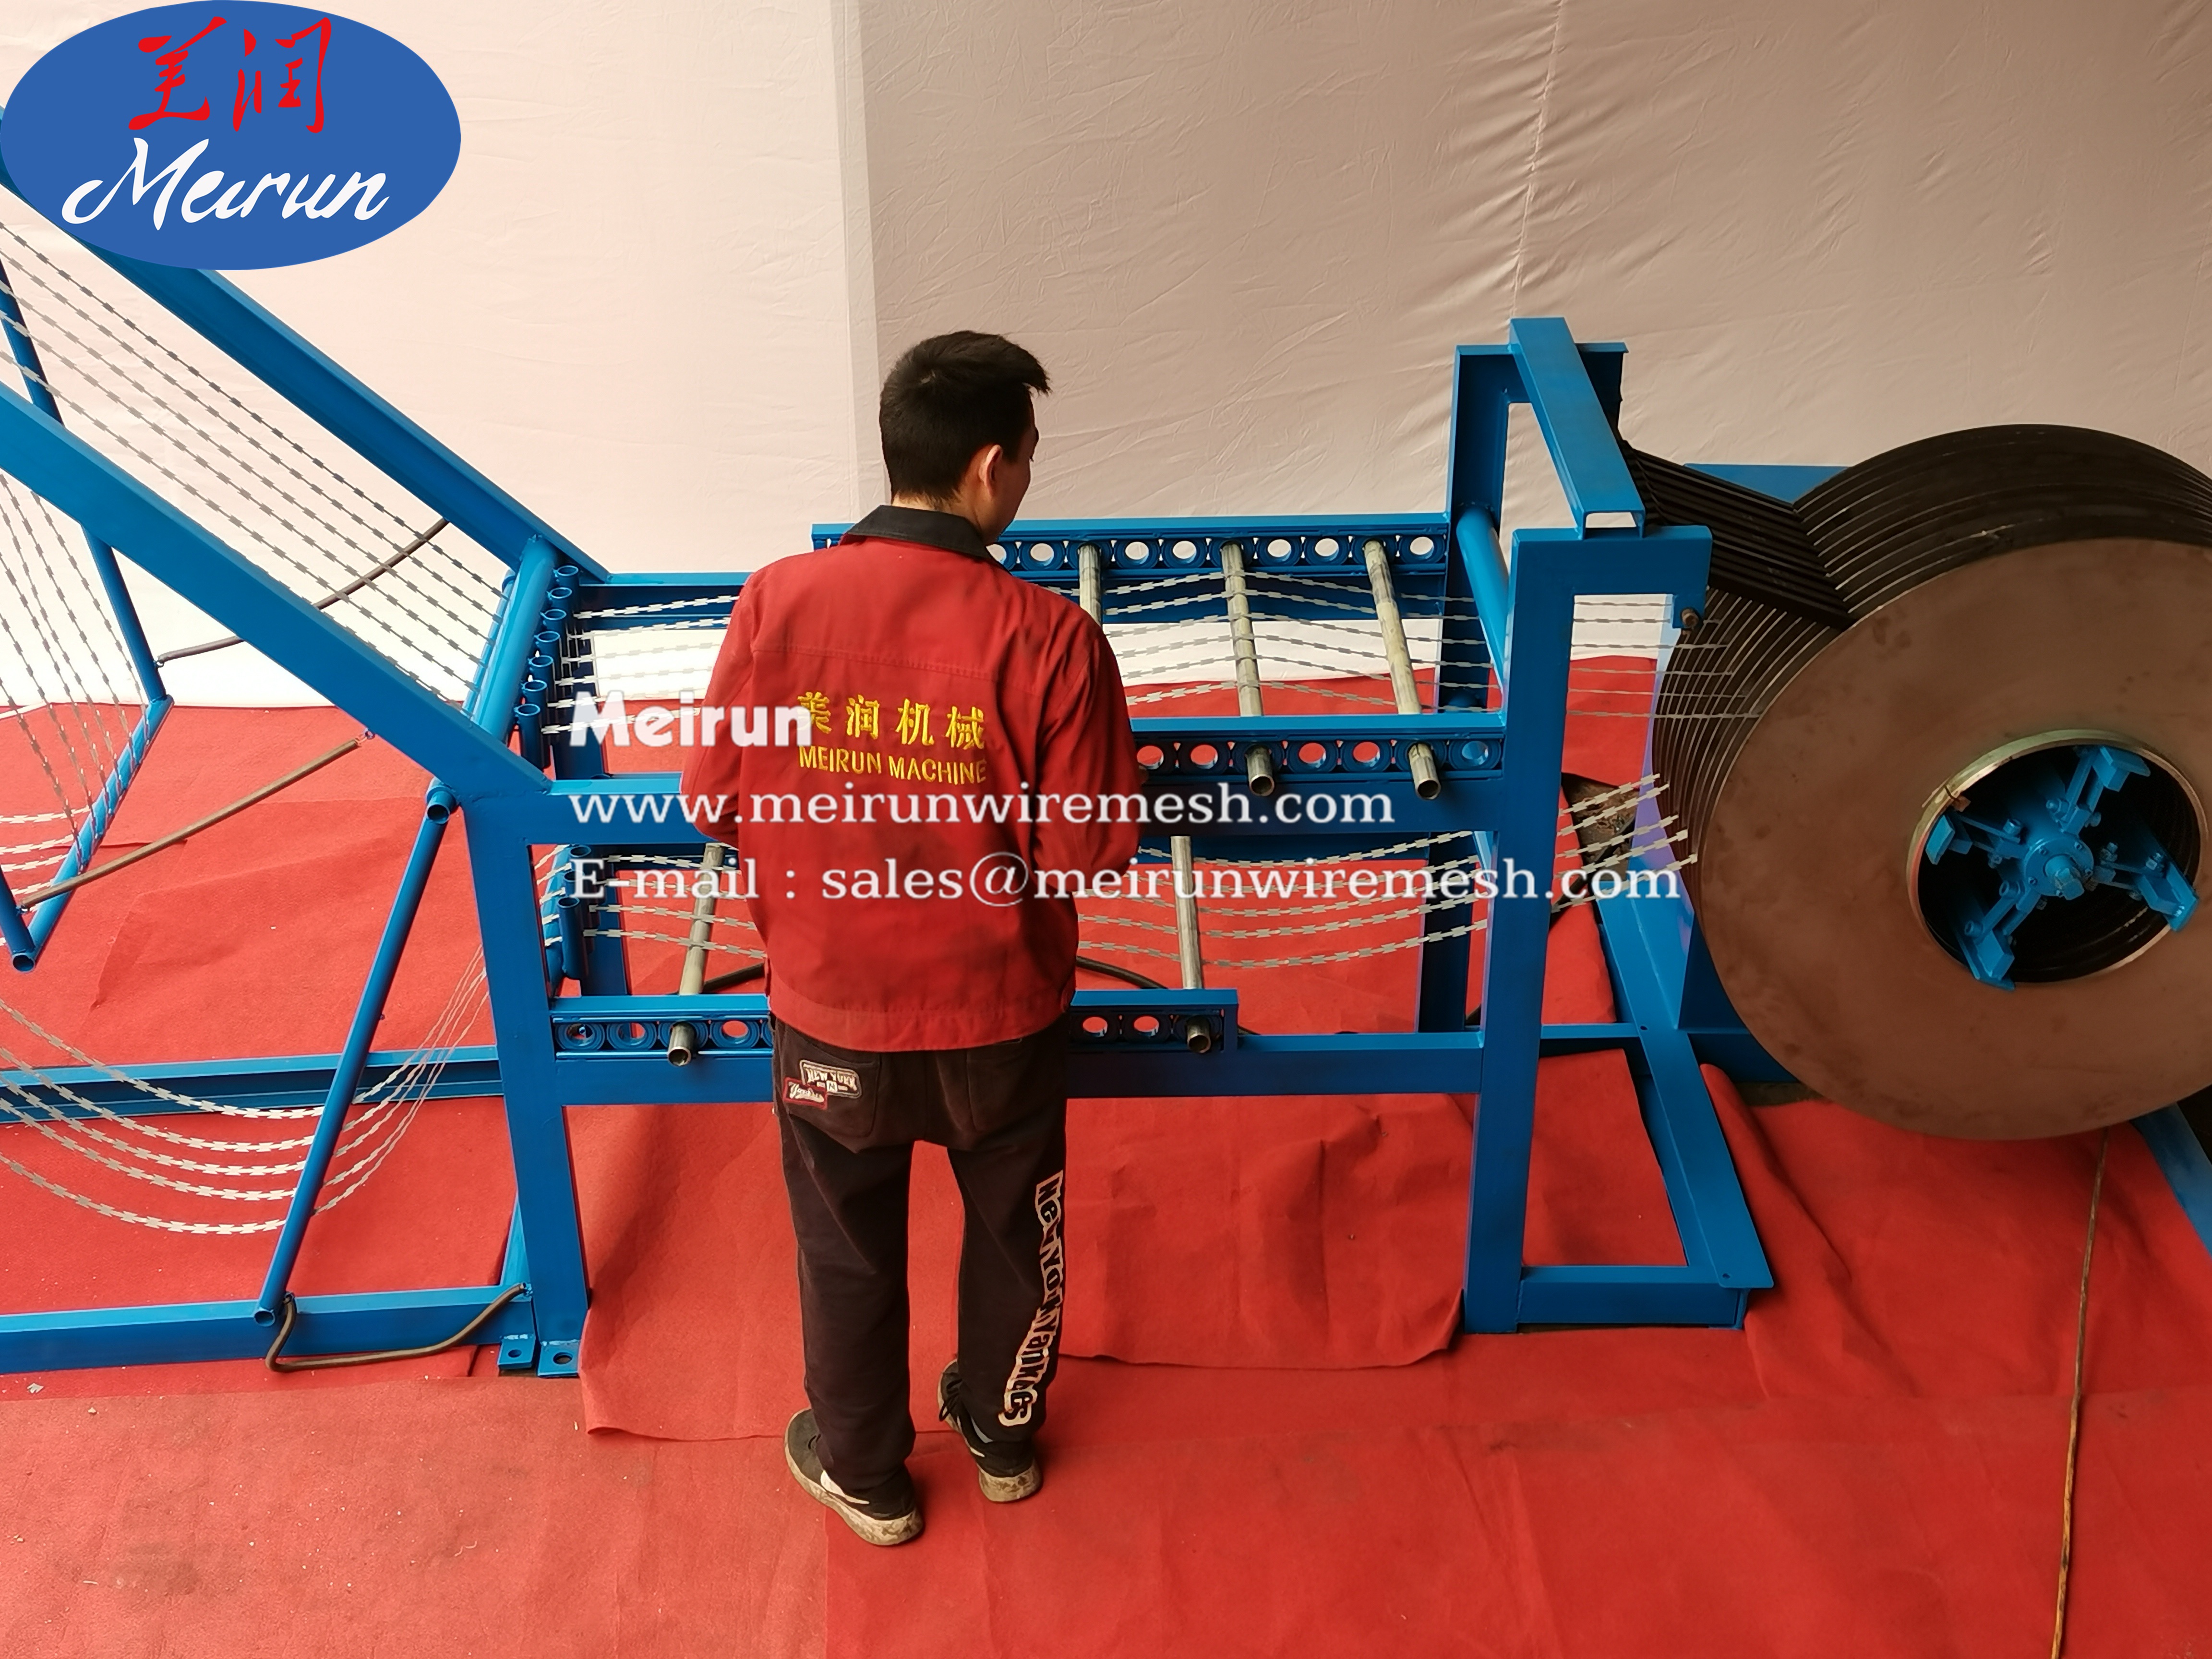  Hight Security Razor Barbed Wire Fence Welded Making Machine 